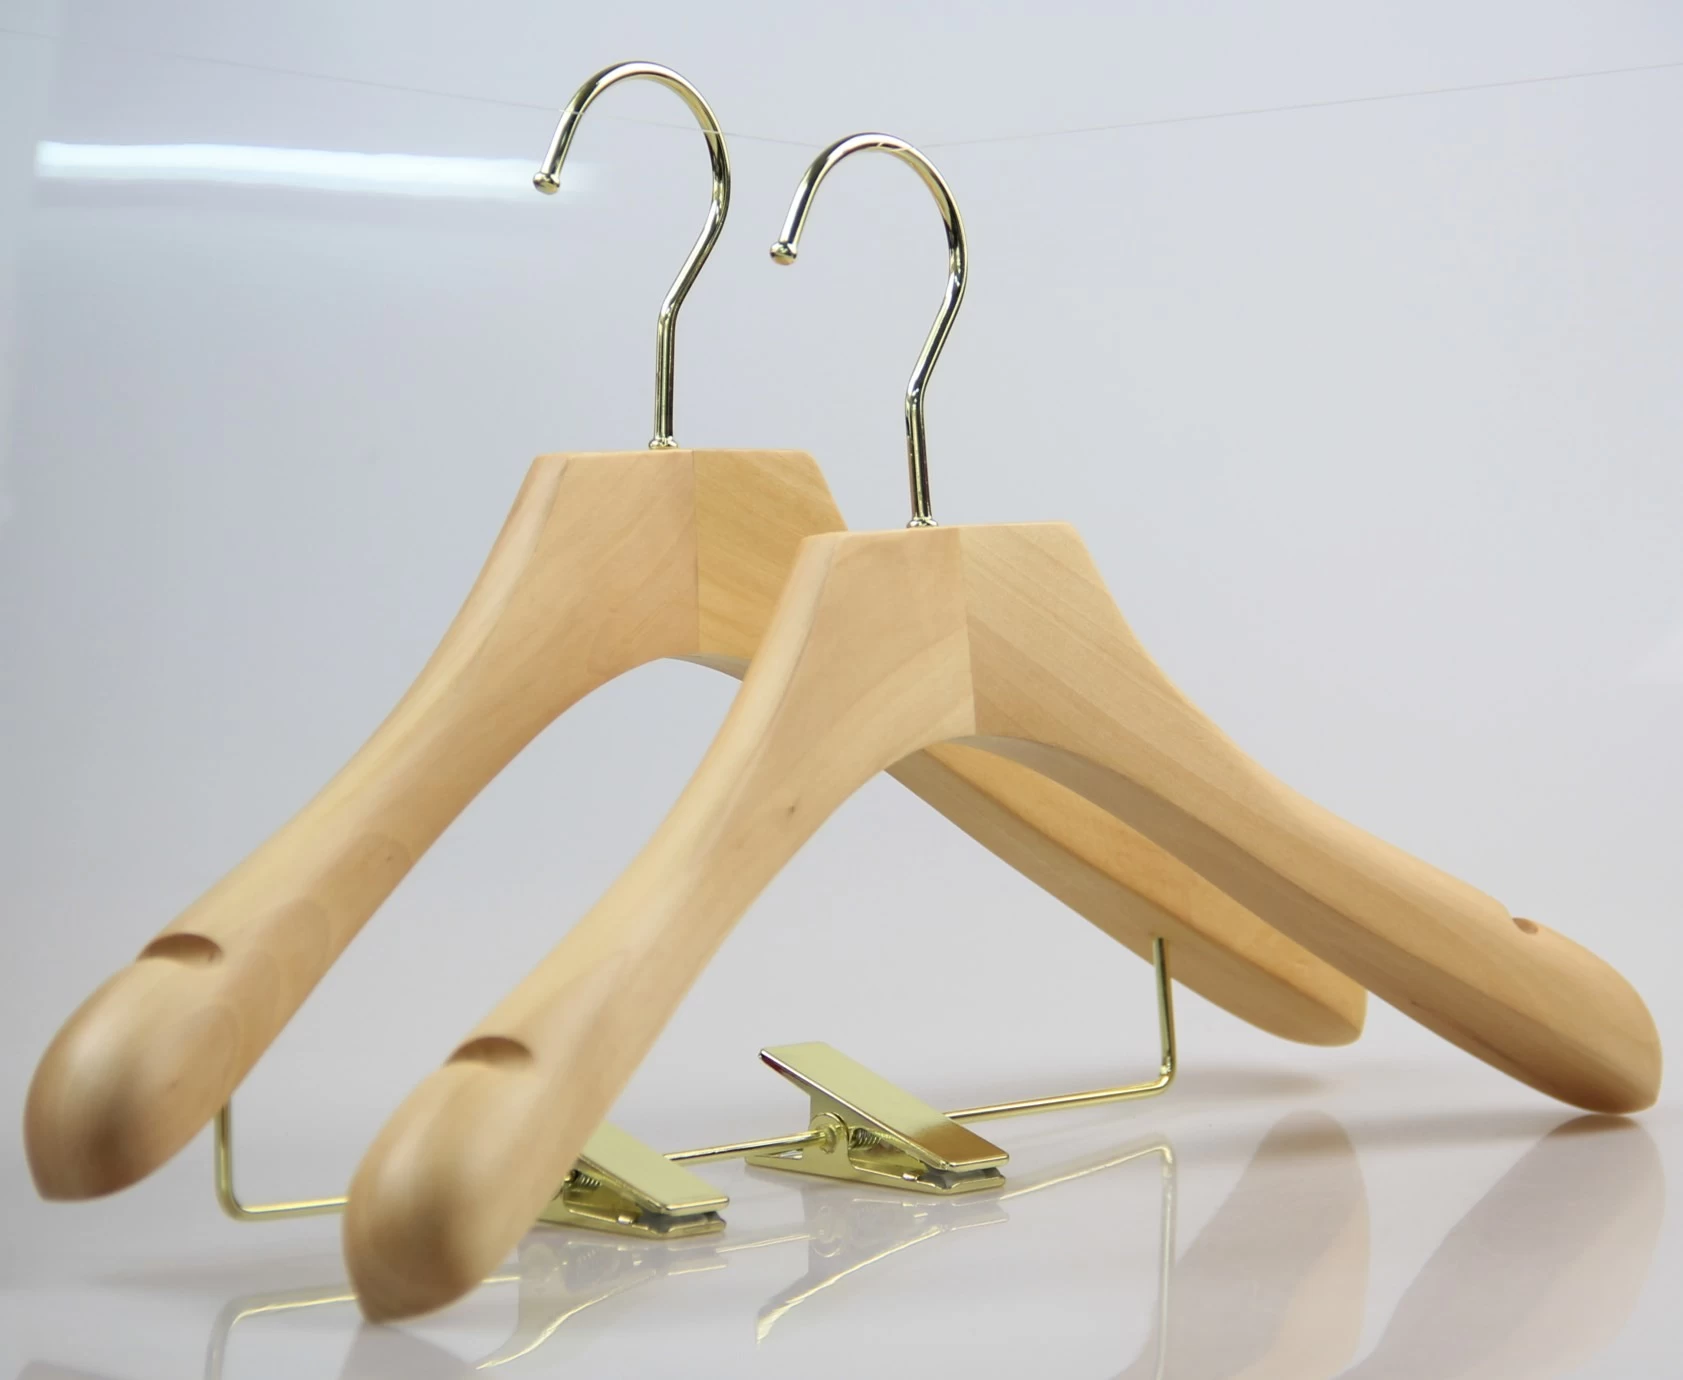 How to choose amazing wood for hangers?